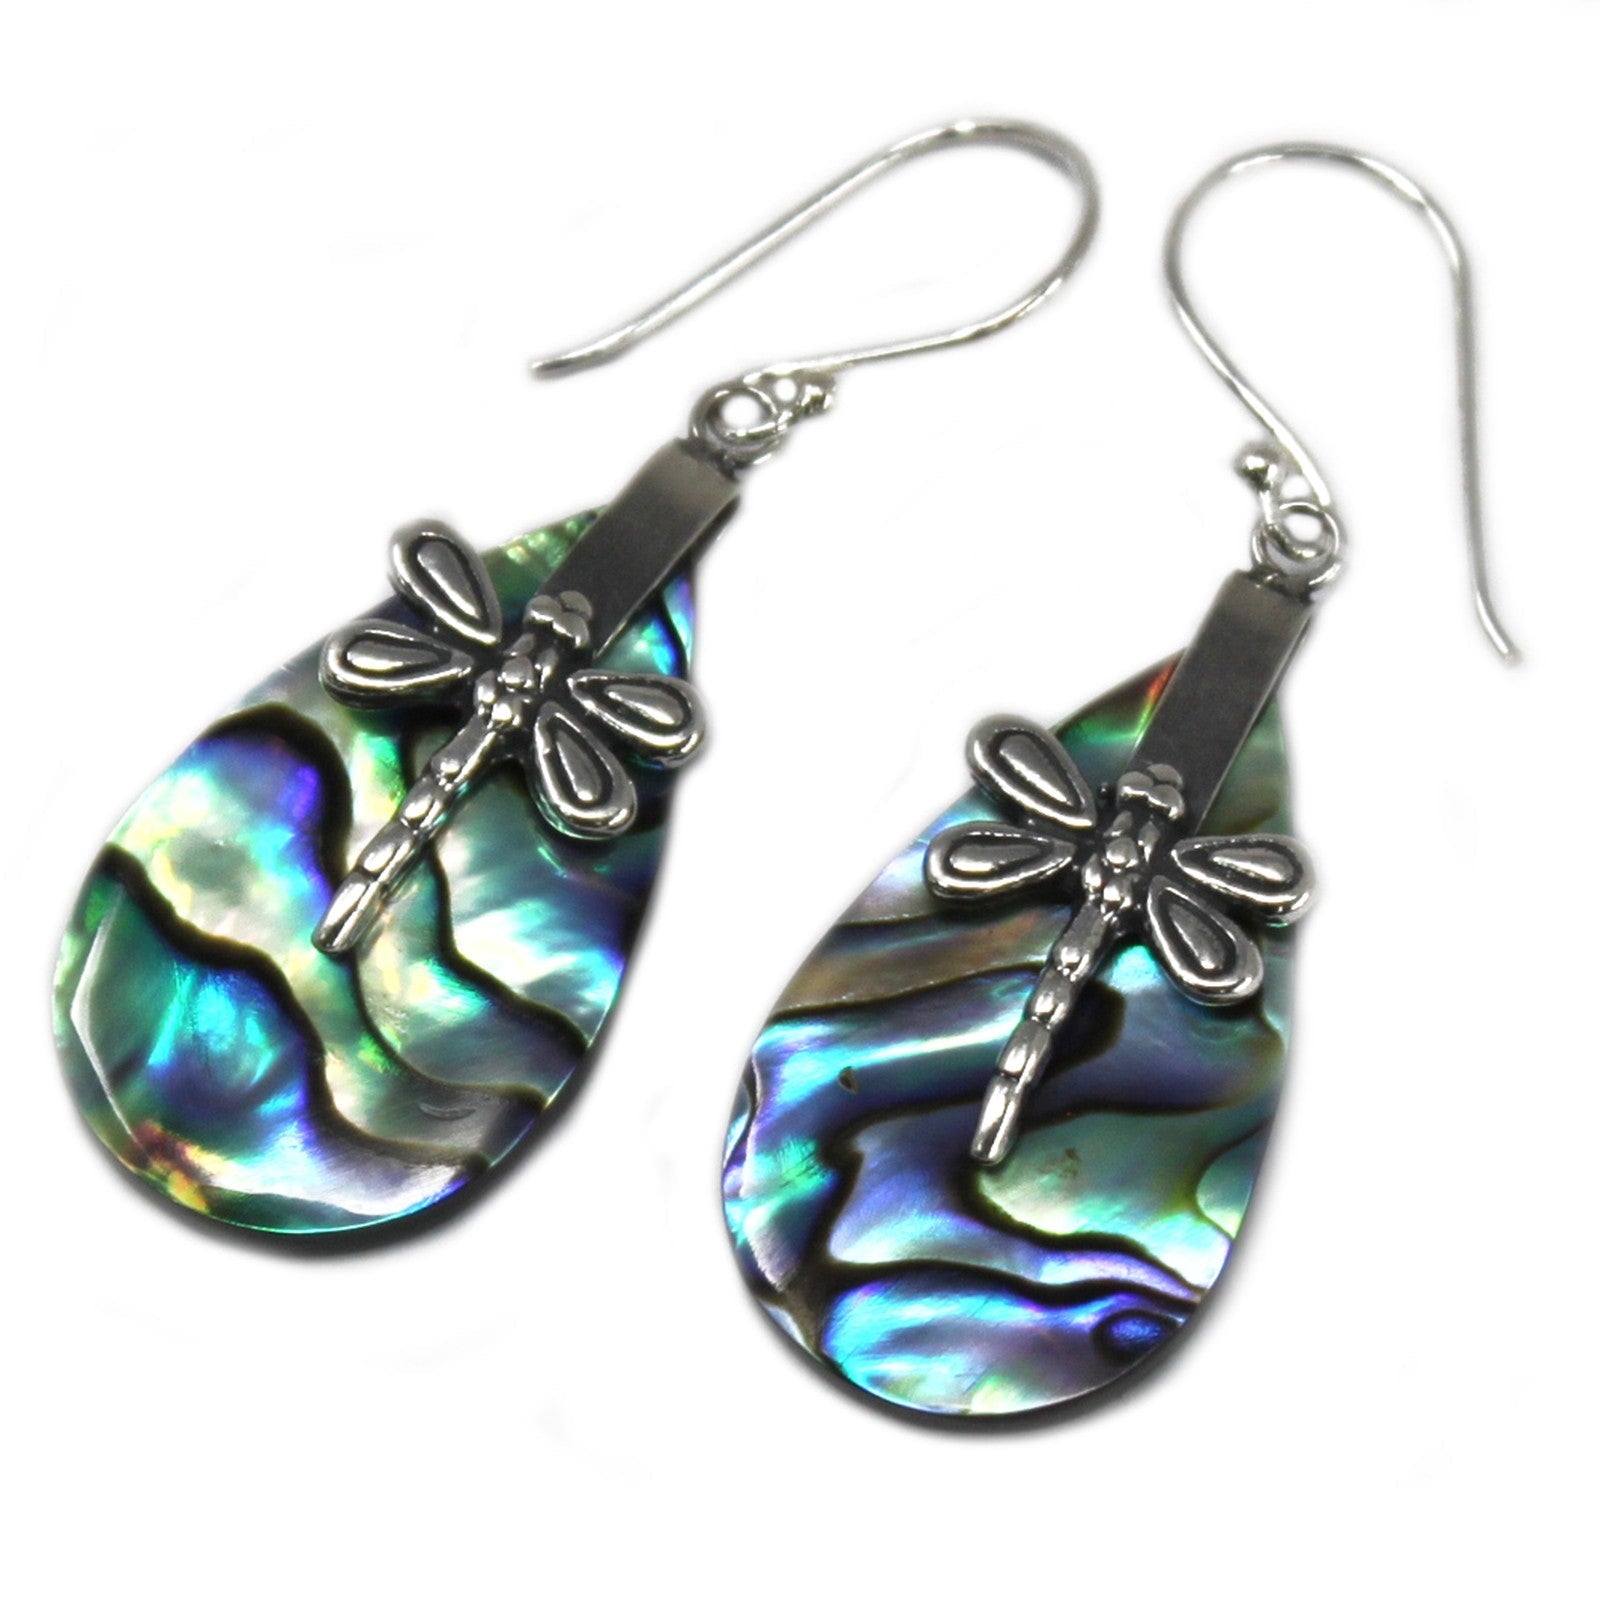 View Shell Silver Earrings Dragonflies Abalone information